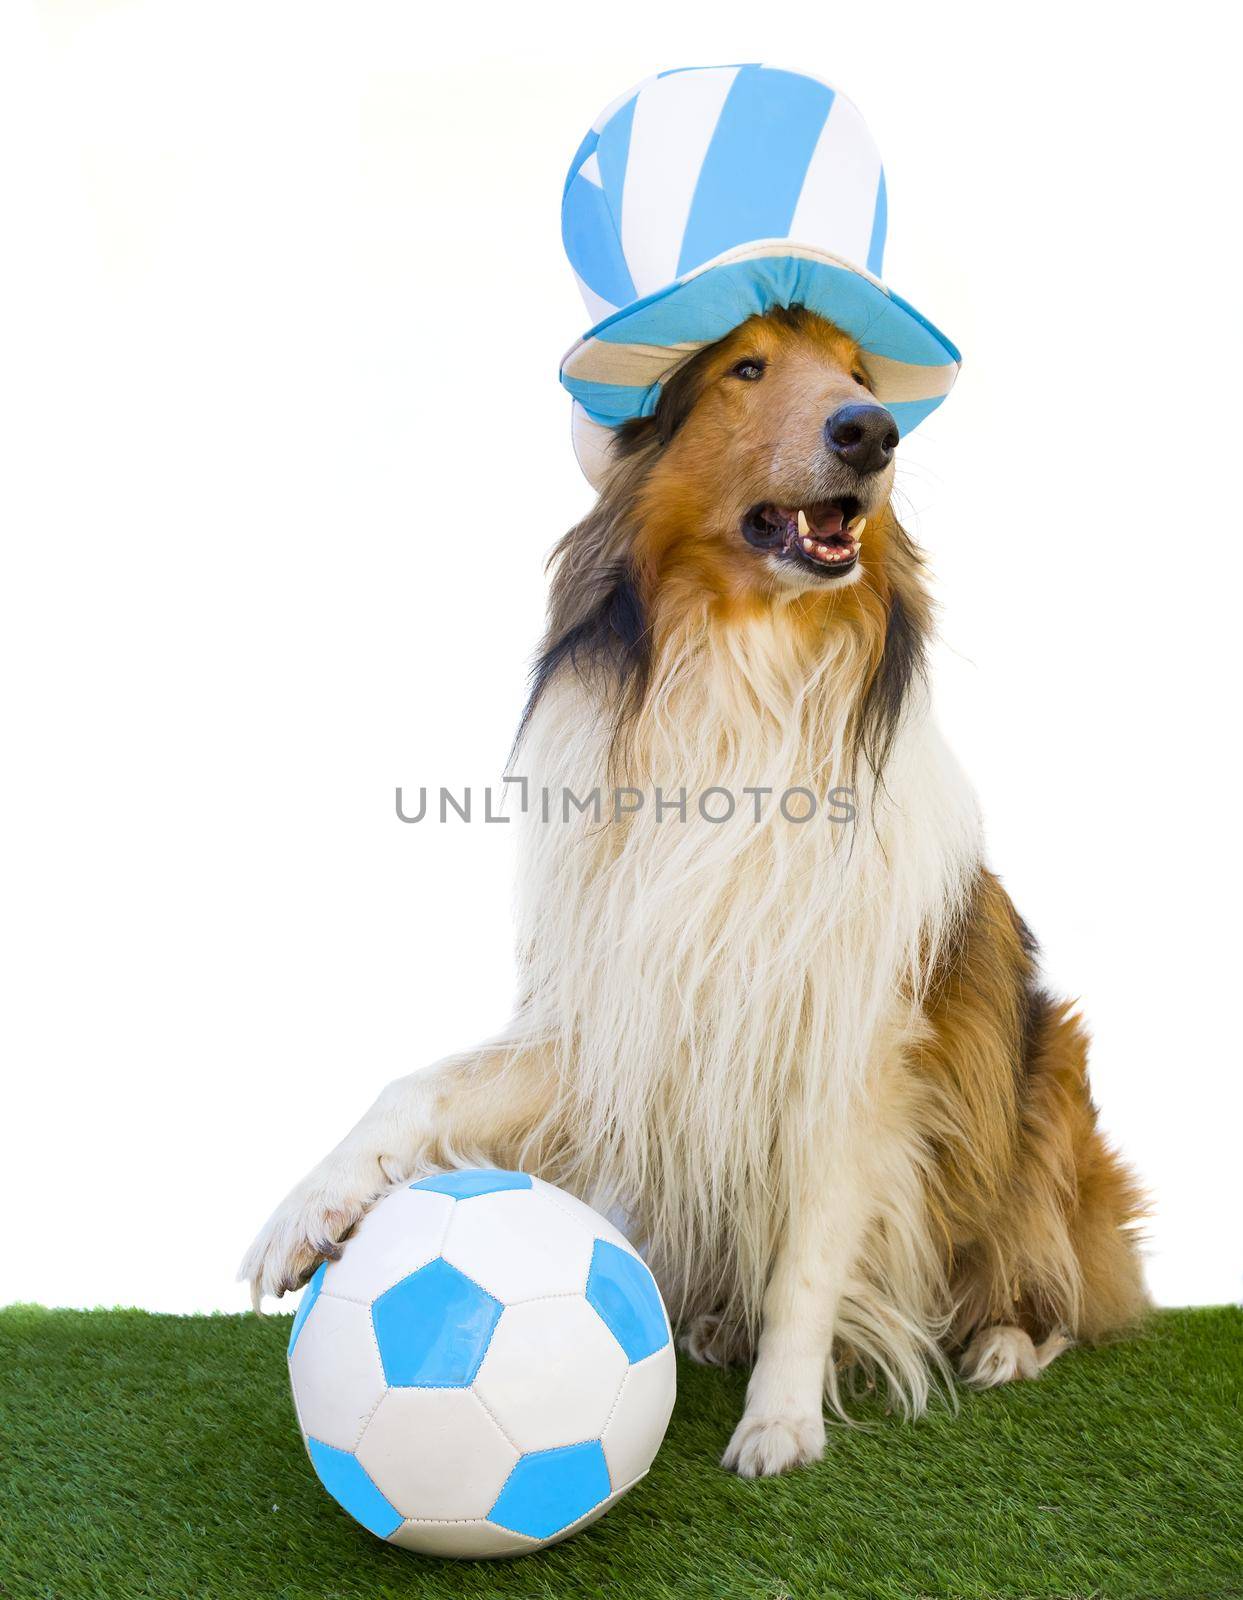 Rough Collie with light blue and white top hat and soccer ball by GabrielaBertolini